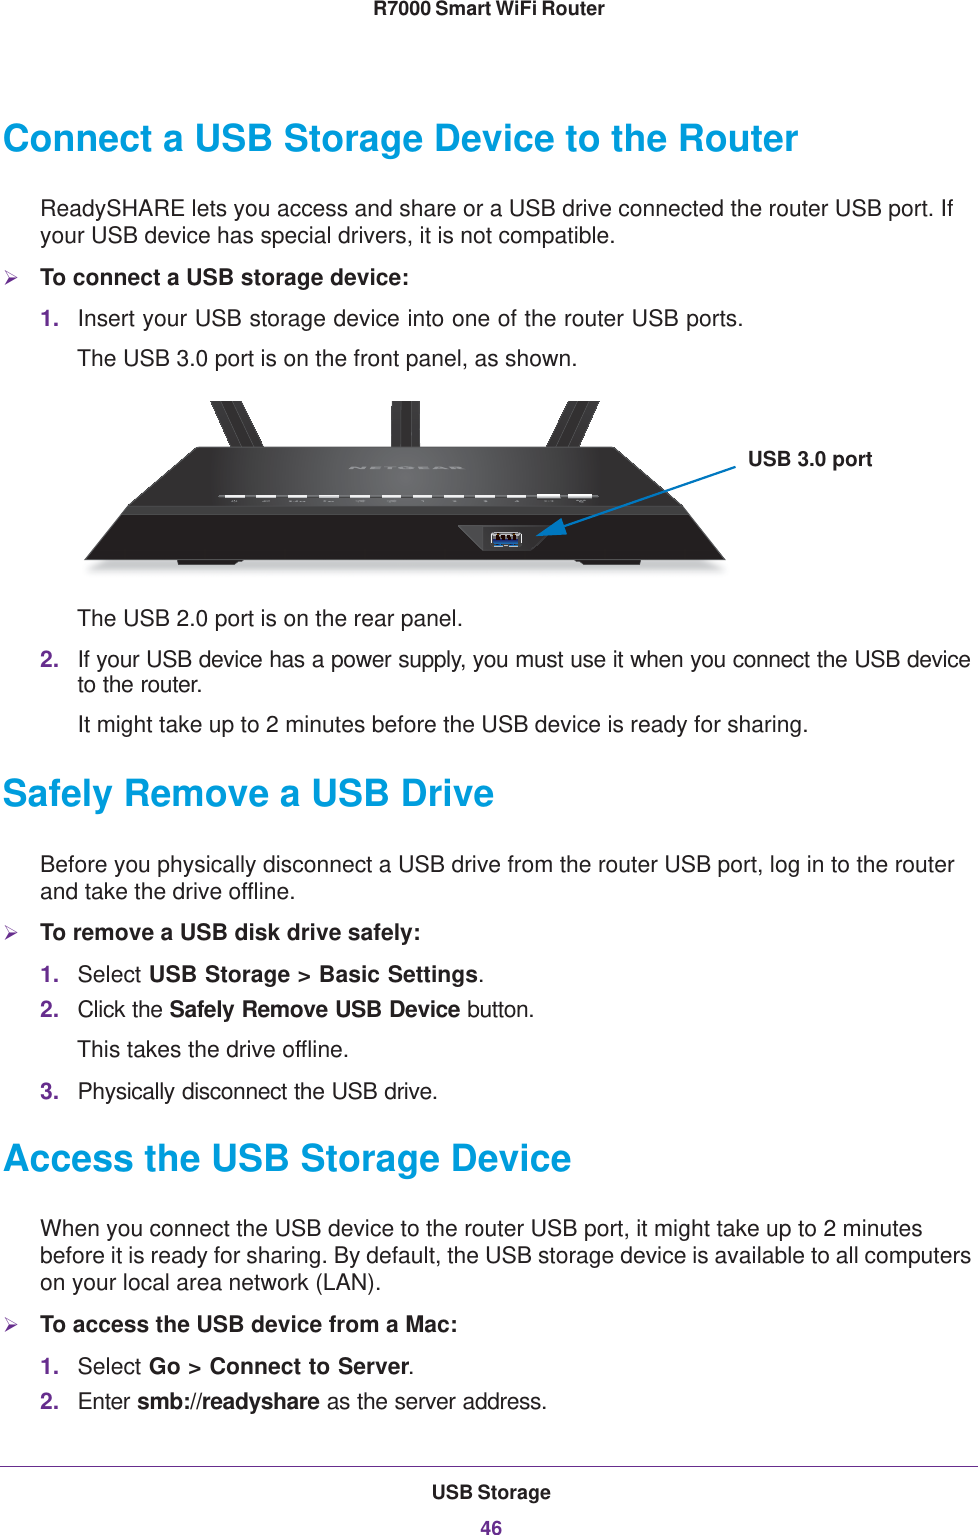 USB Storage46R7000 Smart WiFi Router Connect a USB Storage Device to the RouterReadySHARE lets you access and share or a USB drive connected the router USB port. If your USB device has special drivers, it is not compatible. To connect a USB storage device:1. Insert your USB storage device into one of the router USB ports.The USB 3.0 port is on the front panel, as shown. USB 3.0 portThe USB 2.0 port is on the rear panel.2. If your USB device has a power supply, you must use it when you connect the USB device to the router.It might take up to 2 minutes before the USB device is ready for sharing.Safely Remove a USB DriveBefore you physically disconnect a USB drive from the router USB port, log in to the router and take the drive offline.To remove a USB disk drive safely: 1. Select USB Storage &gt; Basic Settings.2. Click the Safely Remove USB Device button. This takes the drive offline.3. Physically disconnect the USB drive.Access the USB Storage DeviceWhen you connect the USB device to the router USB port, it might take up to 2 minutes before it is ready for sharing. By default, the USB storage device is available to all computers on your local area network (LAN). To access the USB device from a Mac: 1. Select Go &gt; Connect to Server.2. Enter smb://readyshare as the server address.